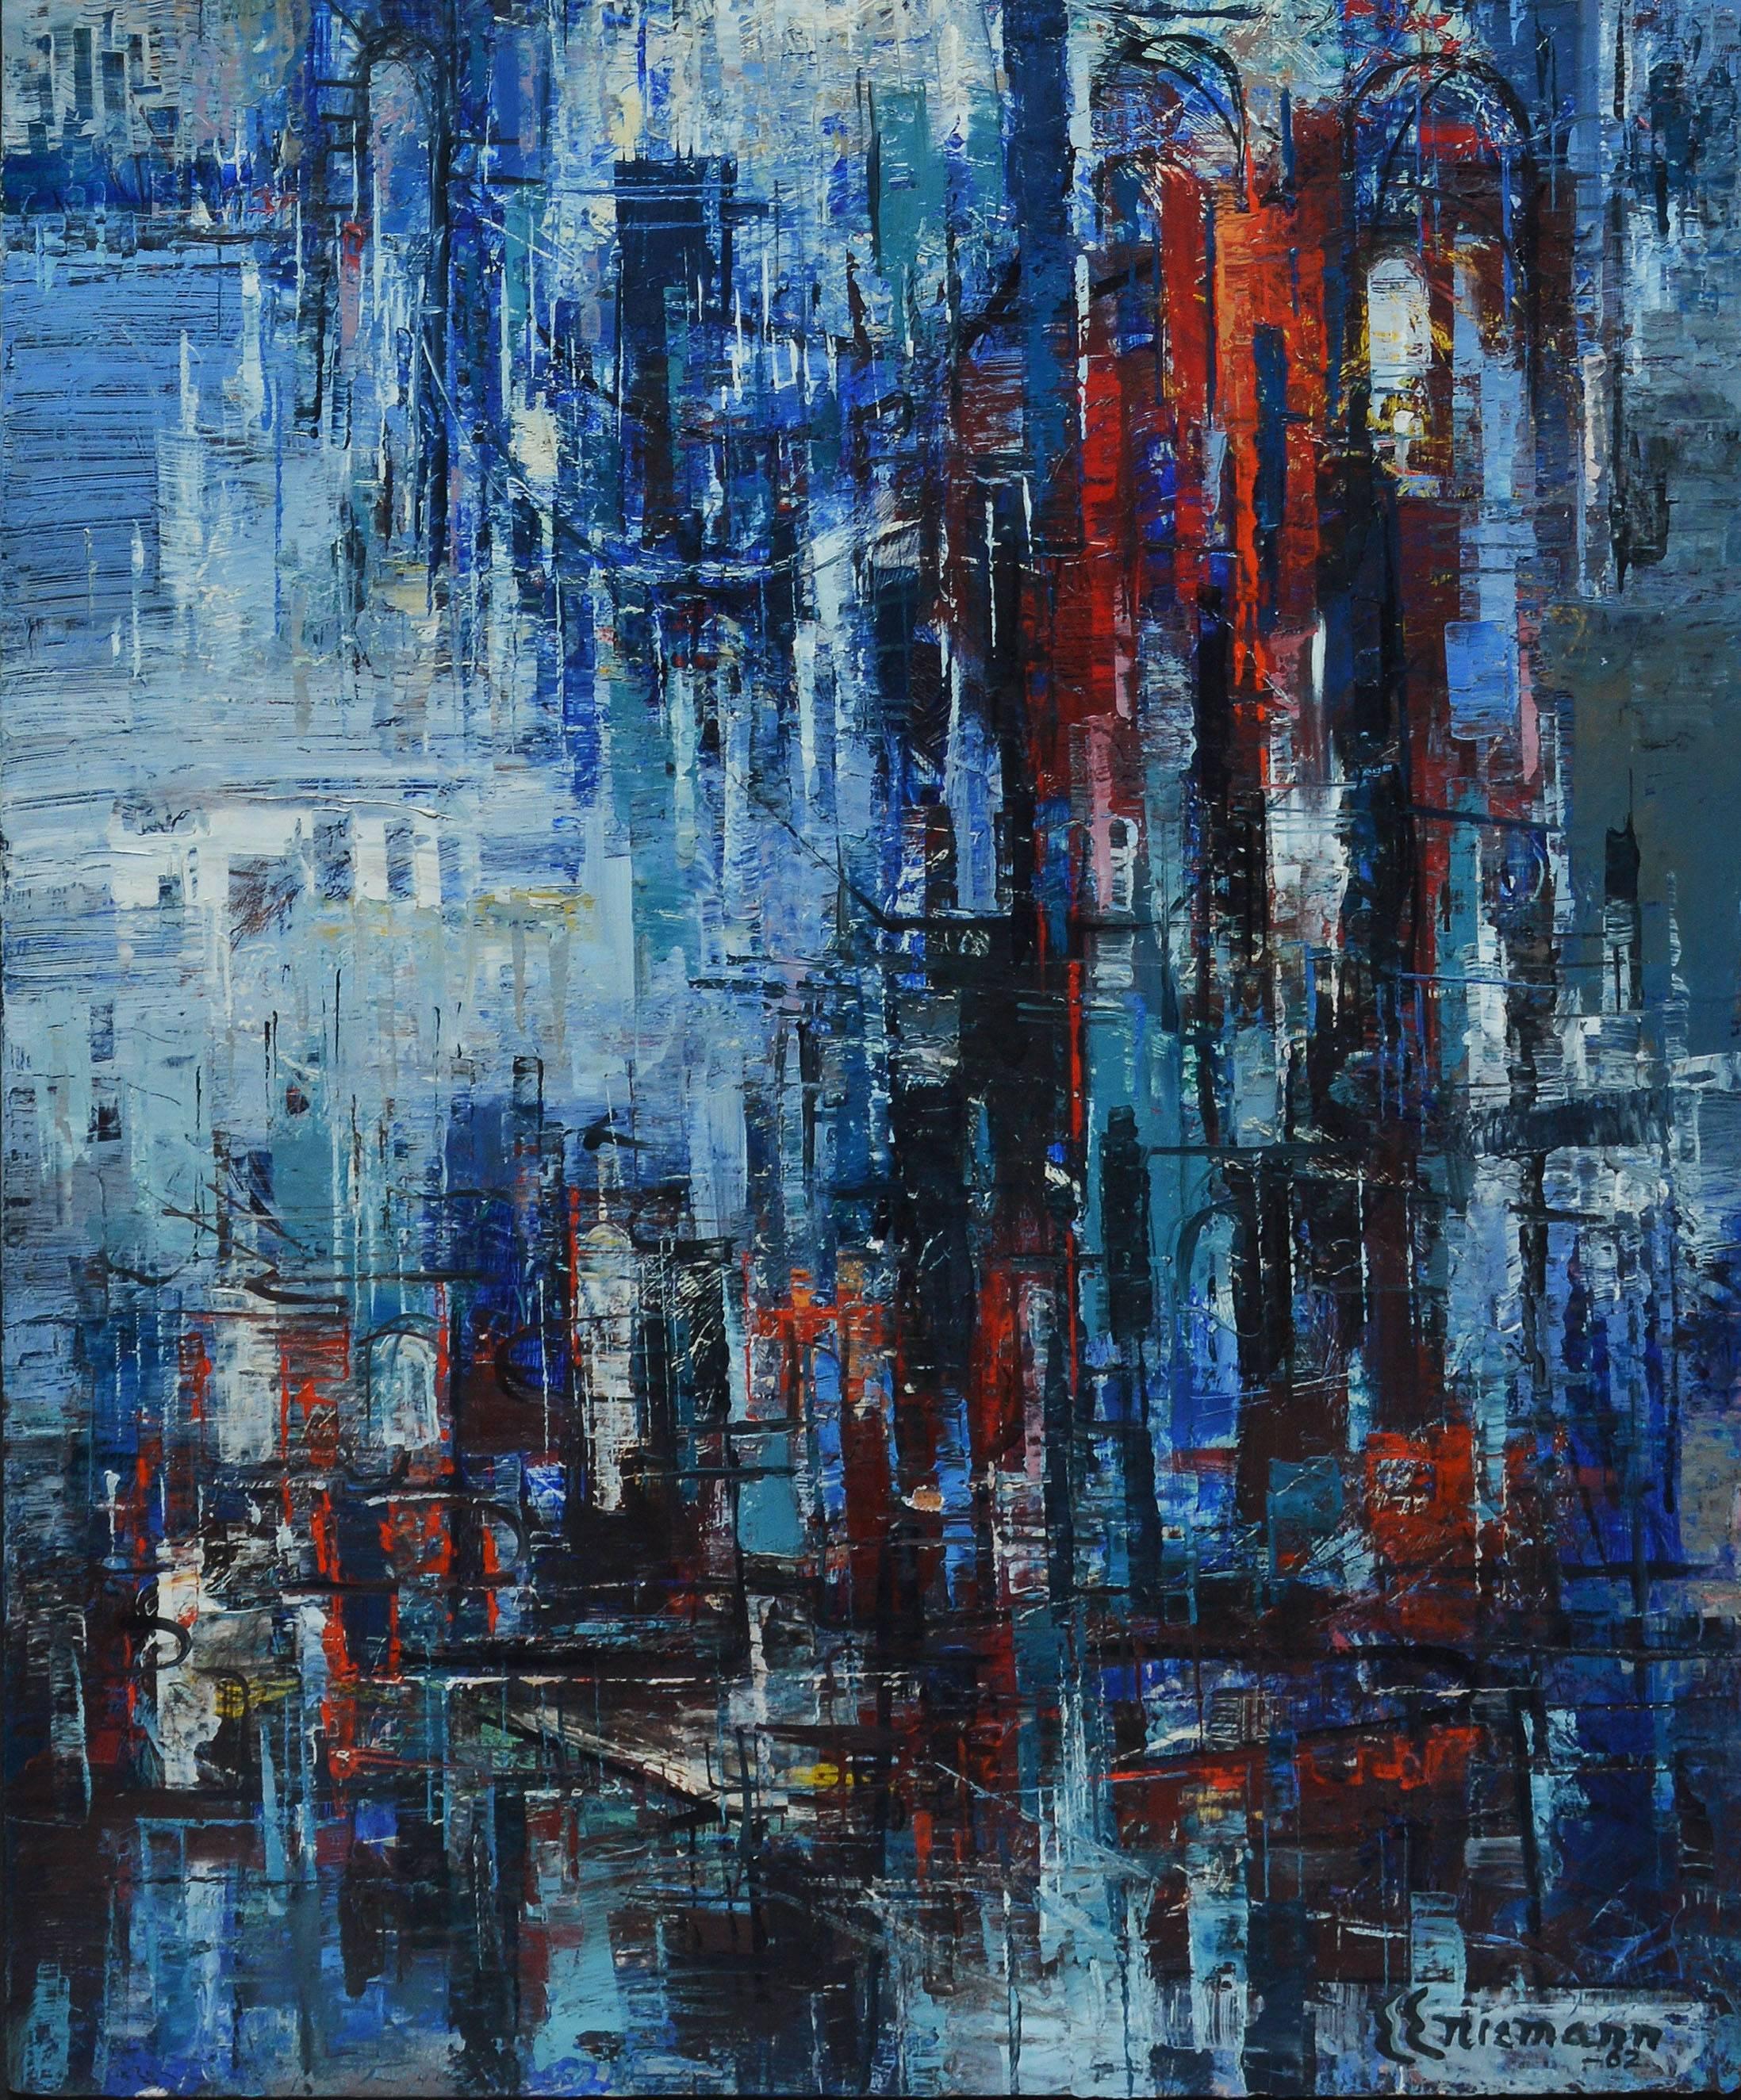 Abstract View of the Brooklyn Bridge - Abstract Expressionist Painting by Unknown